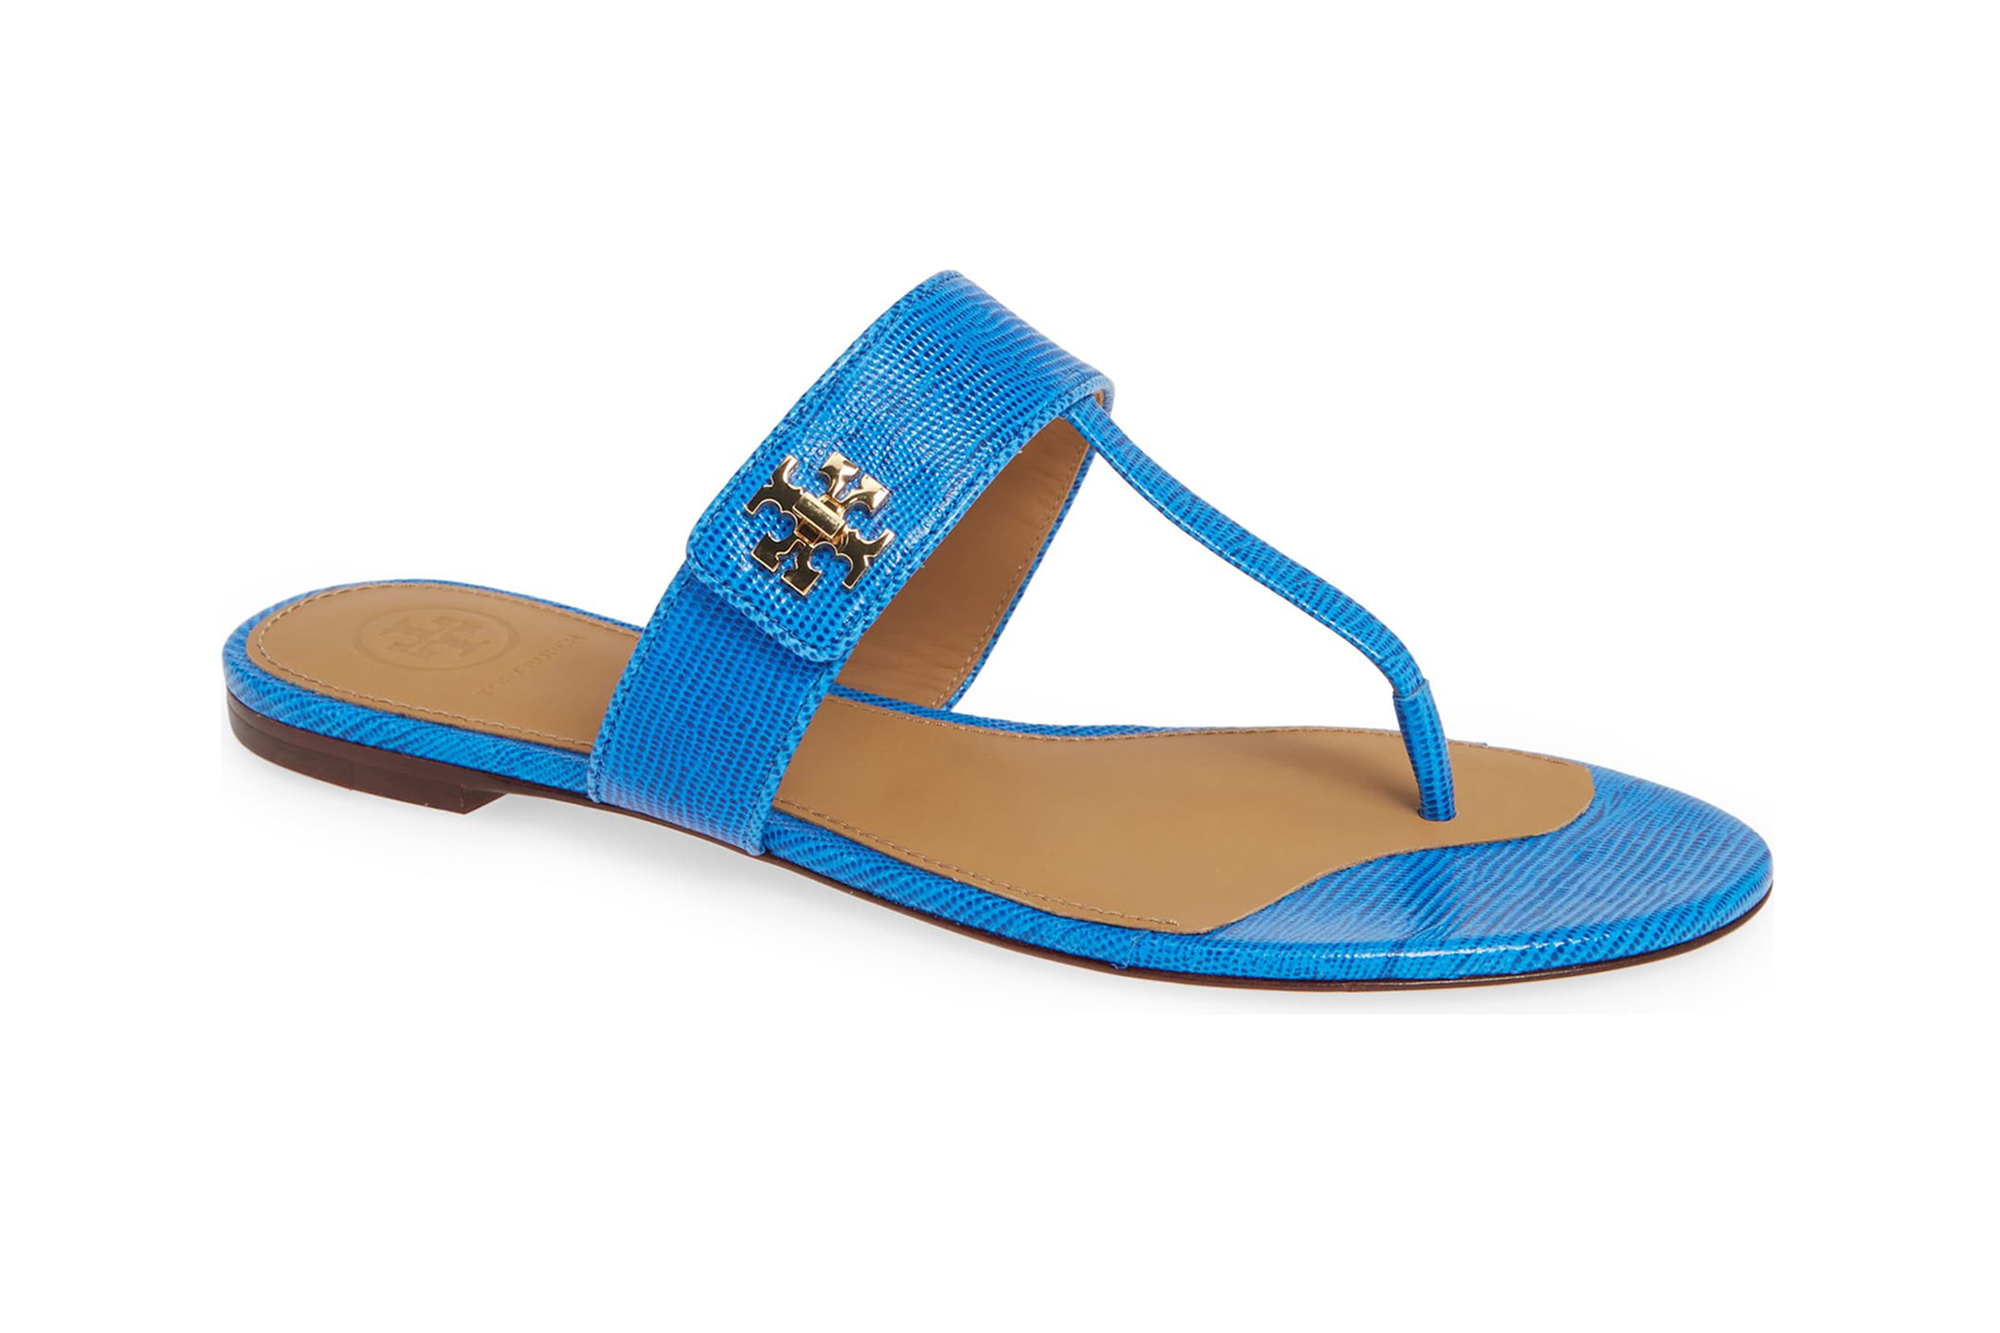 tory burch gold sandals nordstrom